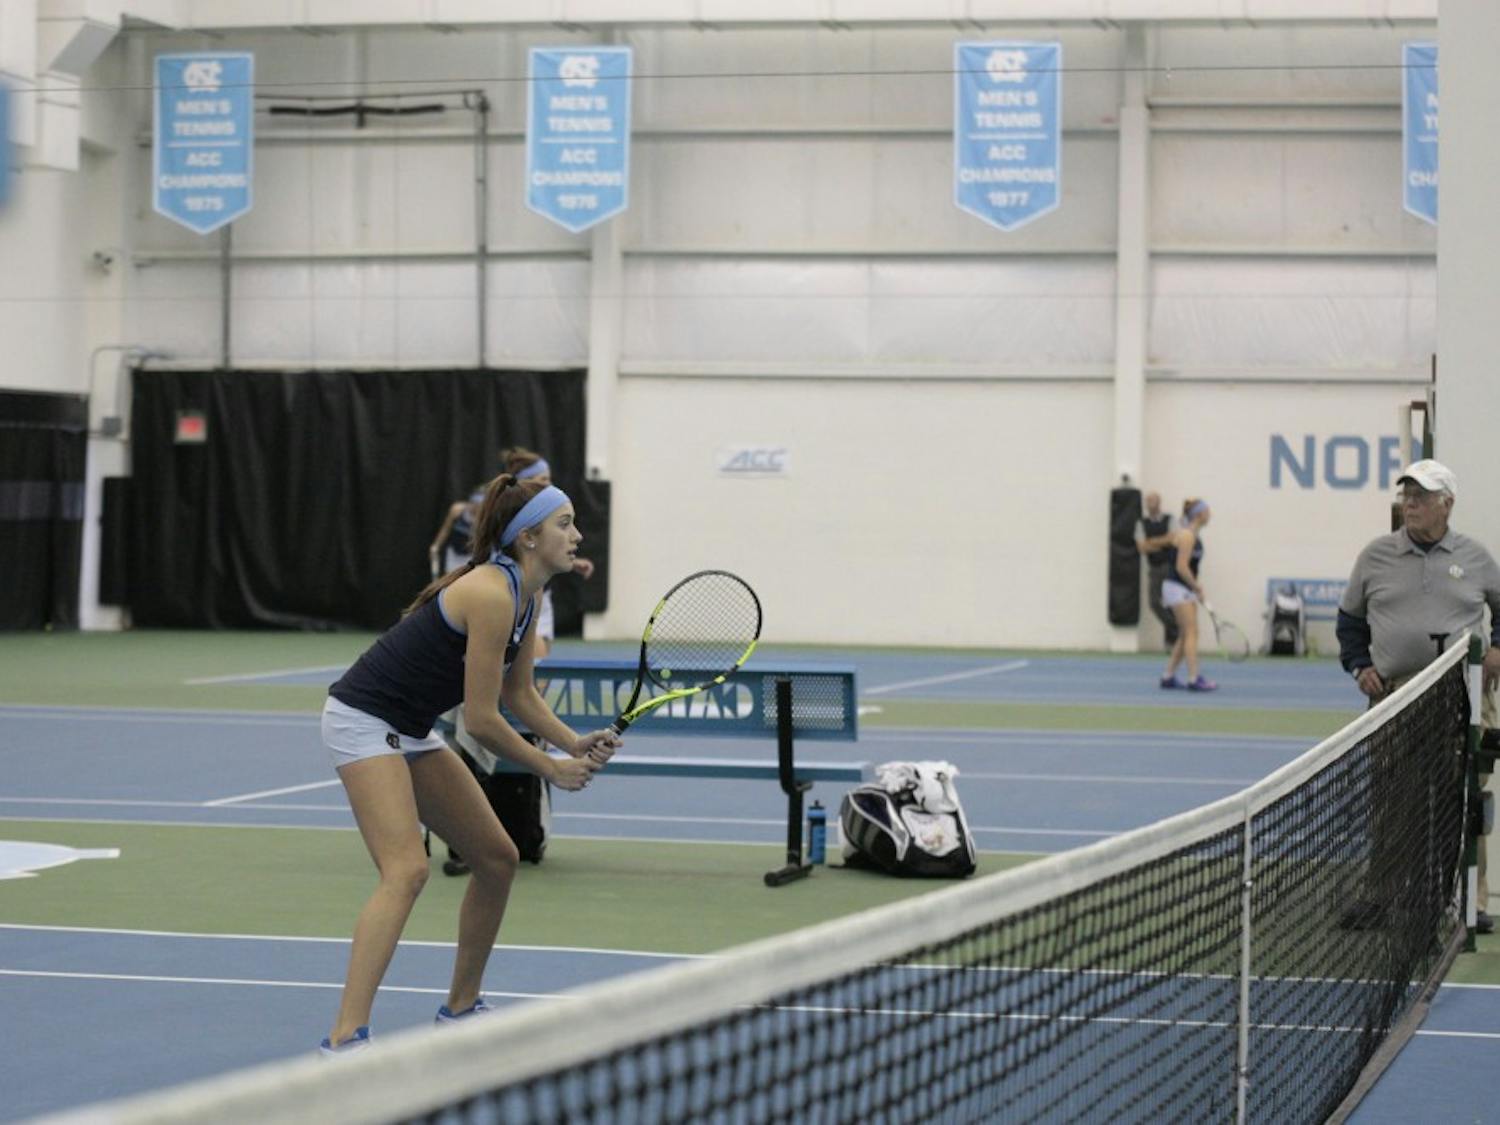 First-year Cameron Morra prepares to receive a serve during a doubles match against East Carolina University at the Cone-Kenfield Tennis Center in Chapel Hill, NC on Wednesday, Jan. 23, 2019. Morra and her partner, Makenna Jones, won both sets in the match.&nbsp;